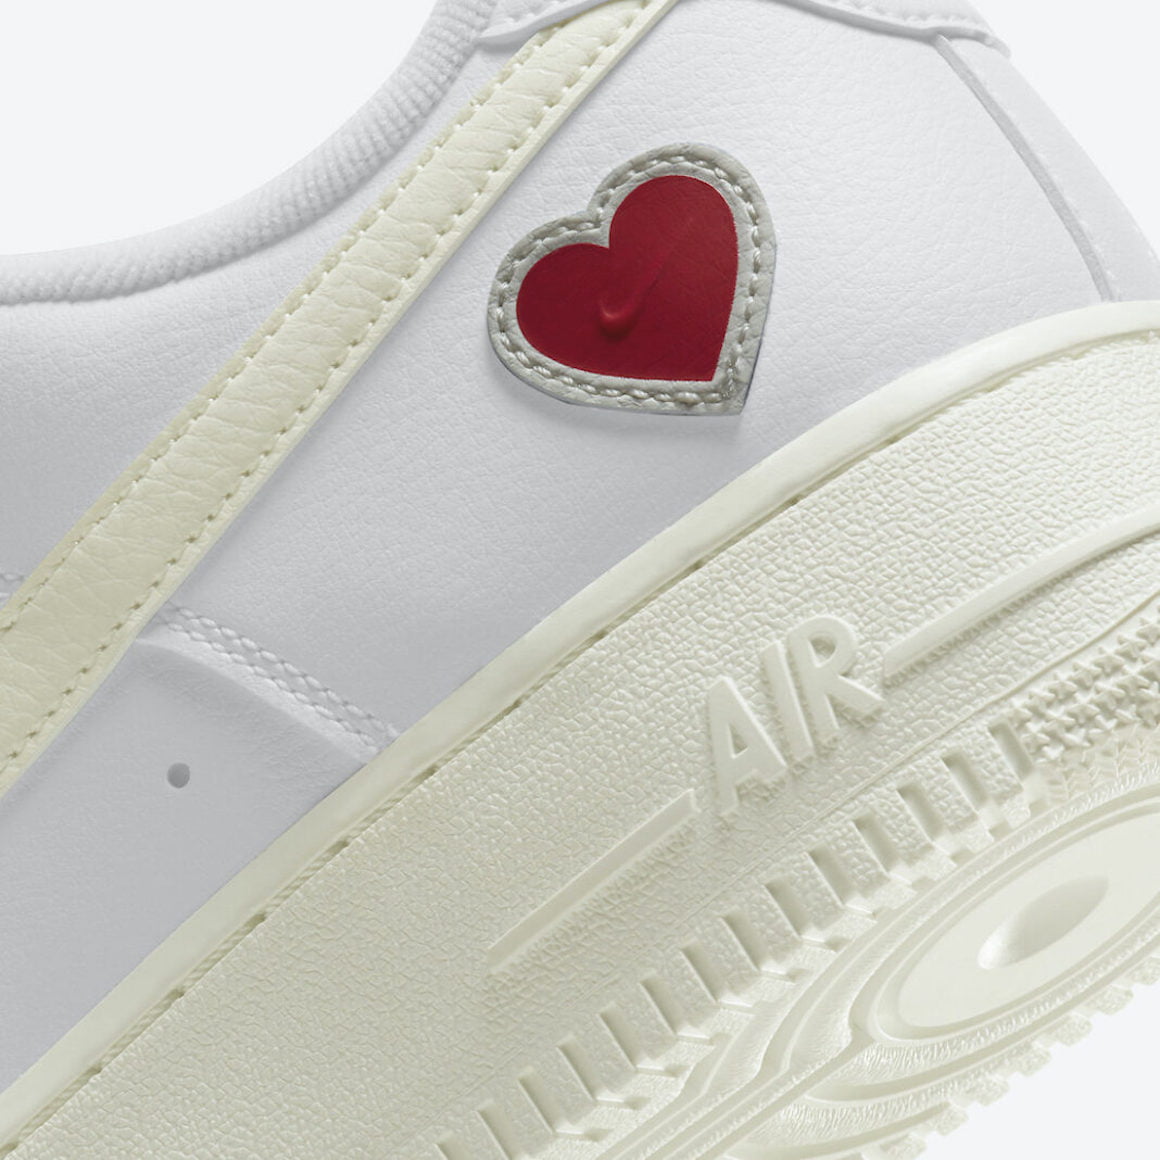 valentines day air forces